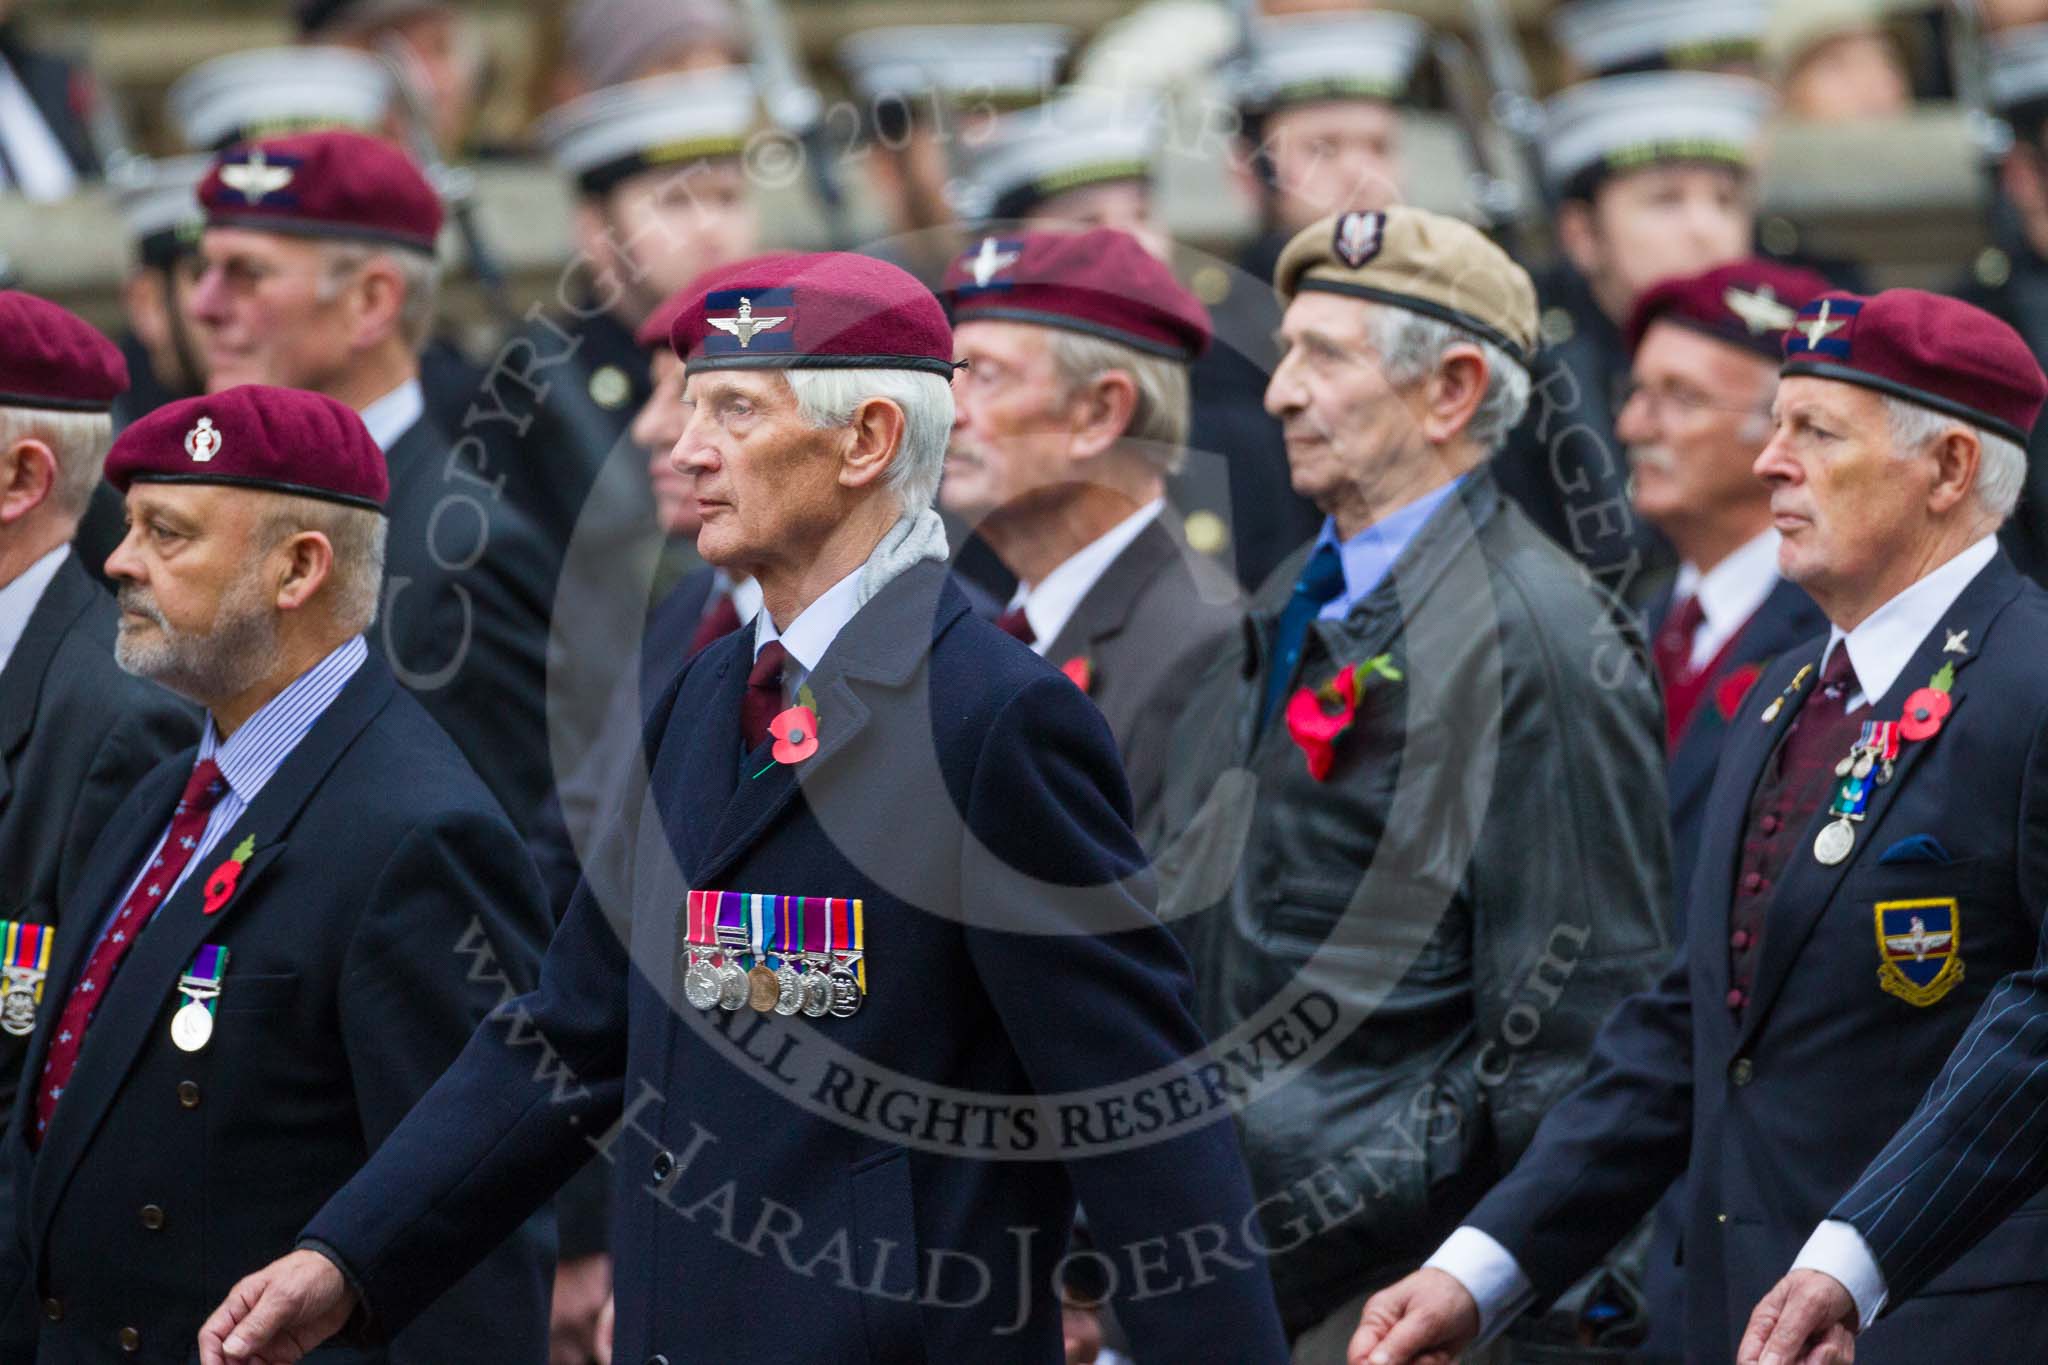 Remembrance Sunday at the Cenotaph 2015: Group A13, Guards Parachute Association.
Cenotaph, Whitehall, London SW1,
London,
Greater London,
United Kingdom,
on 08 November 2015 at 12:11, image #1276